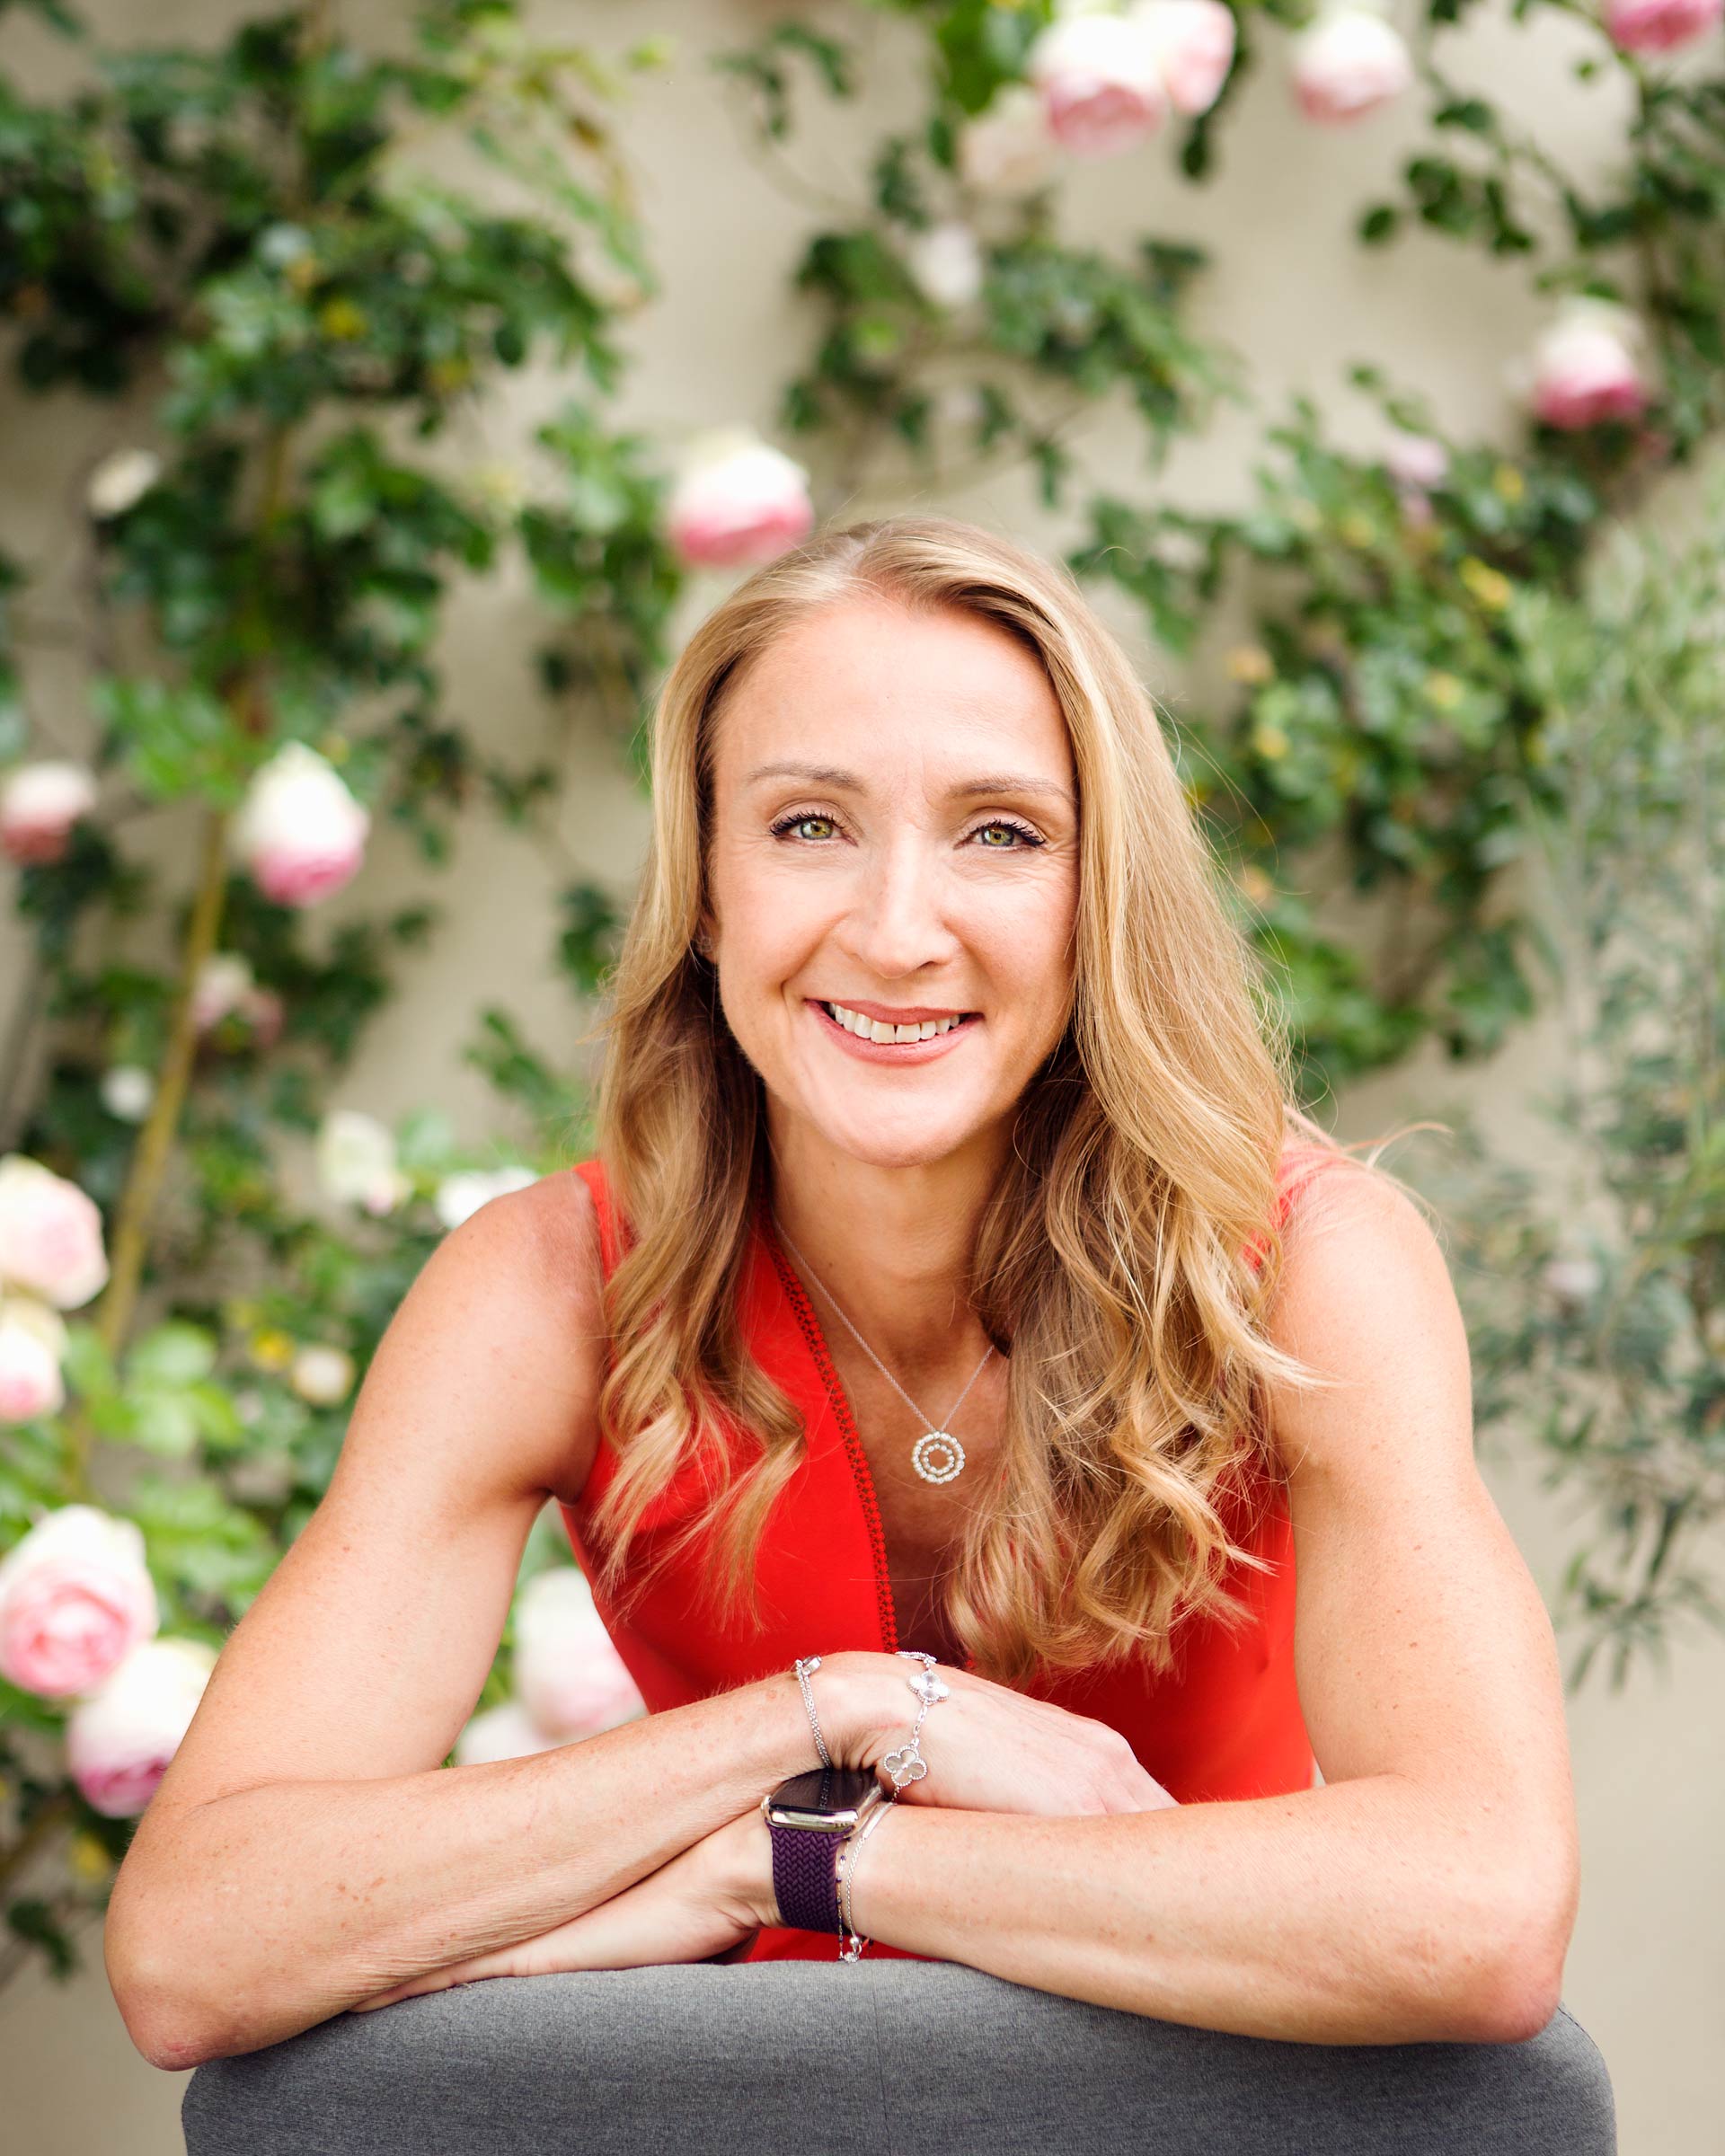 Photograph of Paula Radcliffe wearing a red dress in her garden